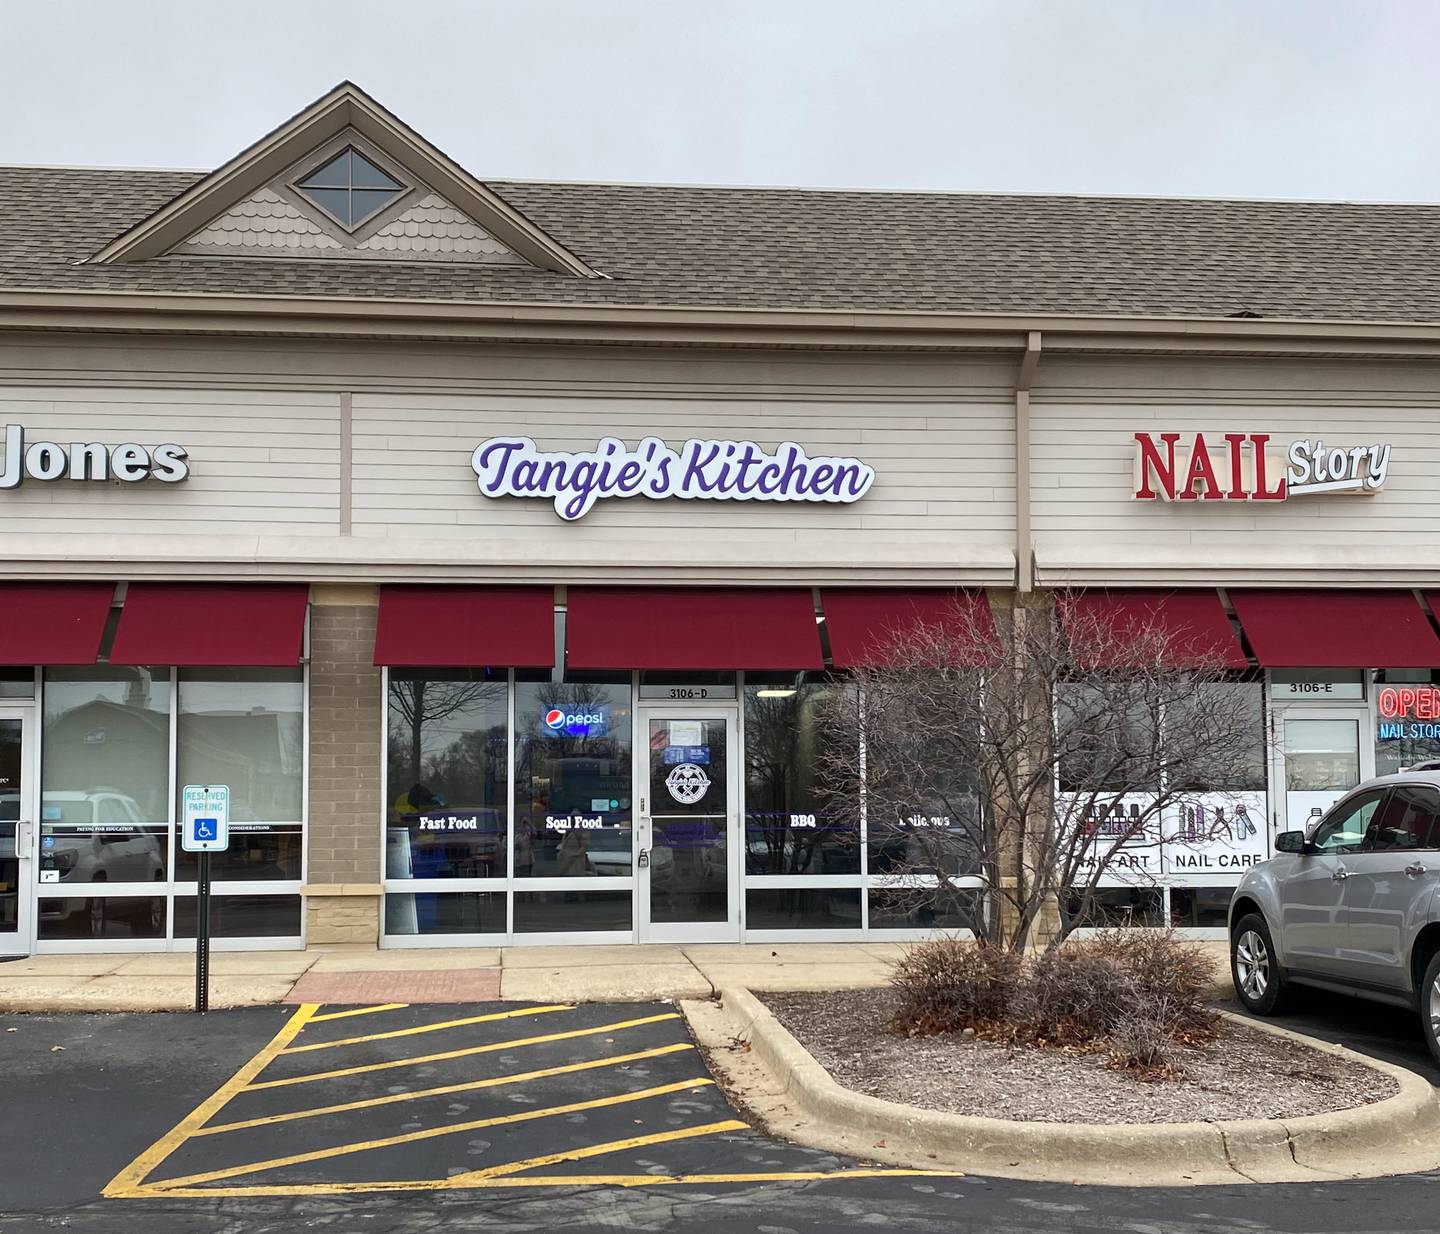 Tangie’s Kitchen is located at 3106 Three Oaks Road, Suite D, Cary.